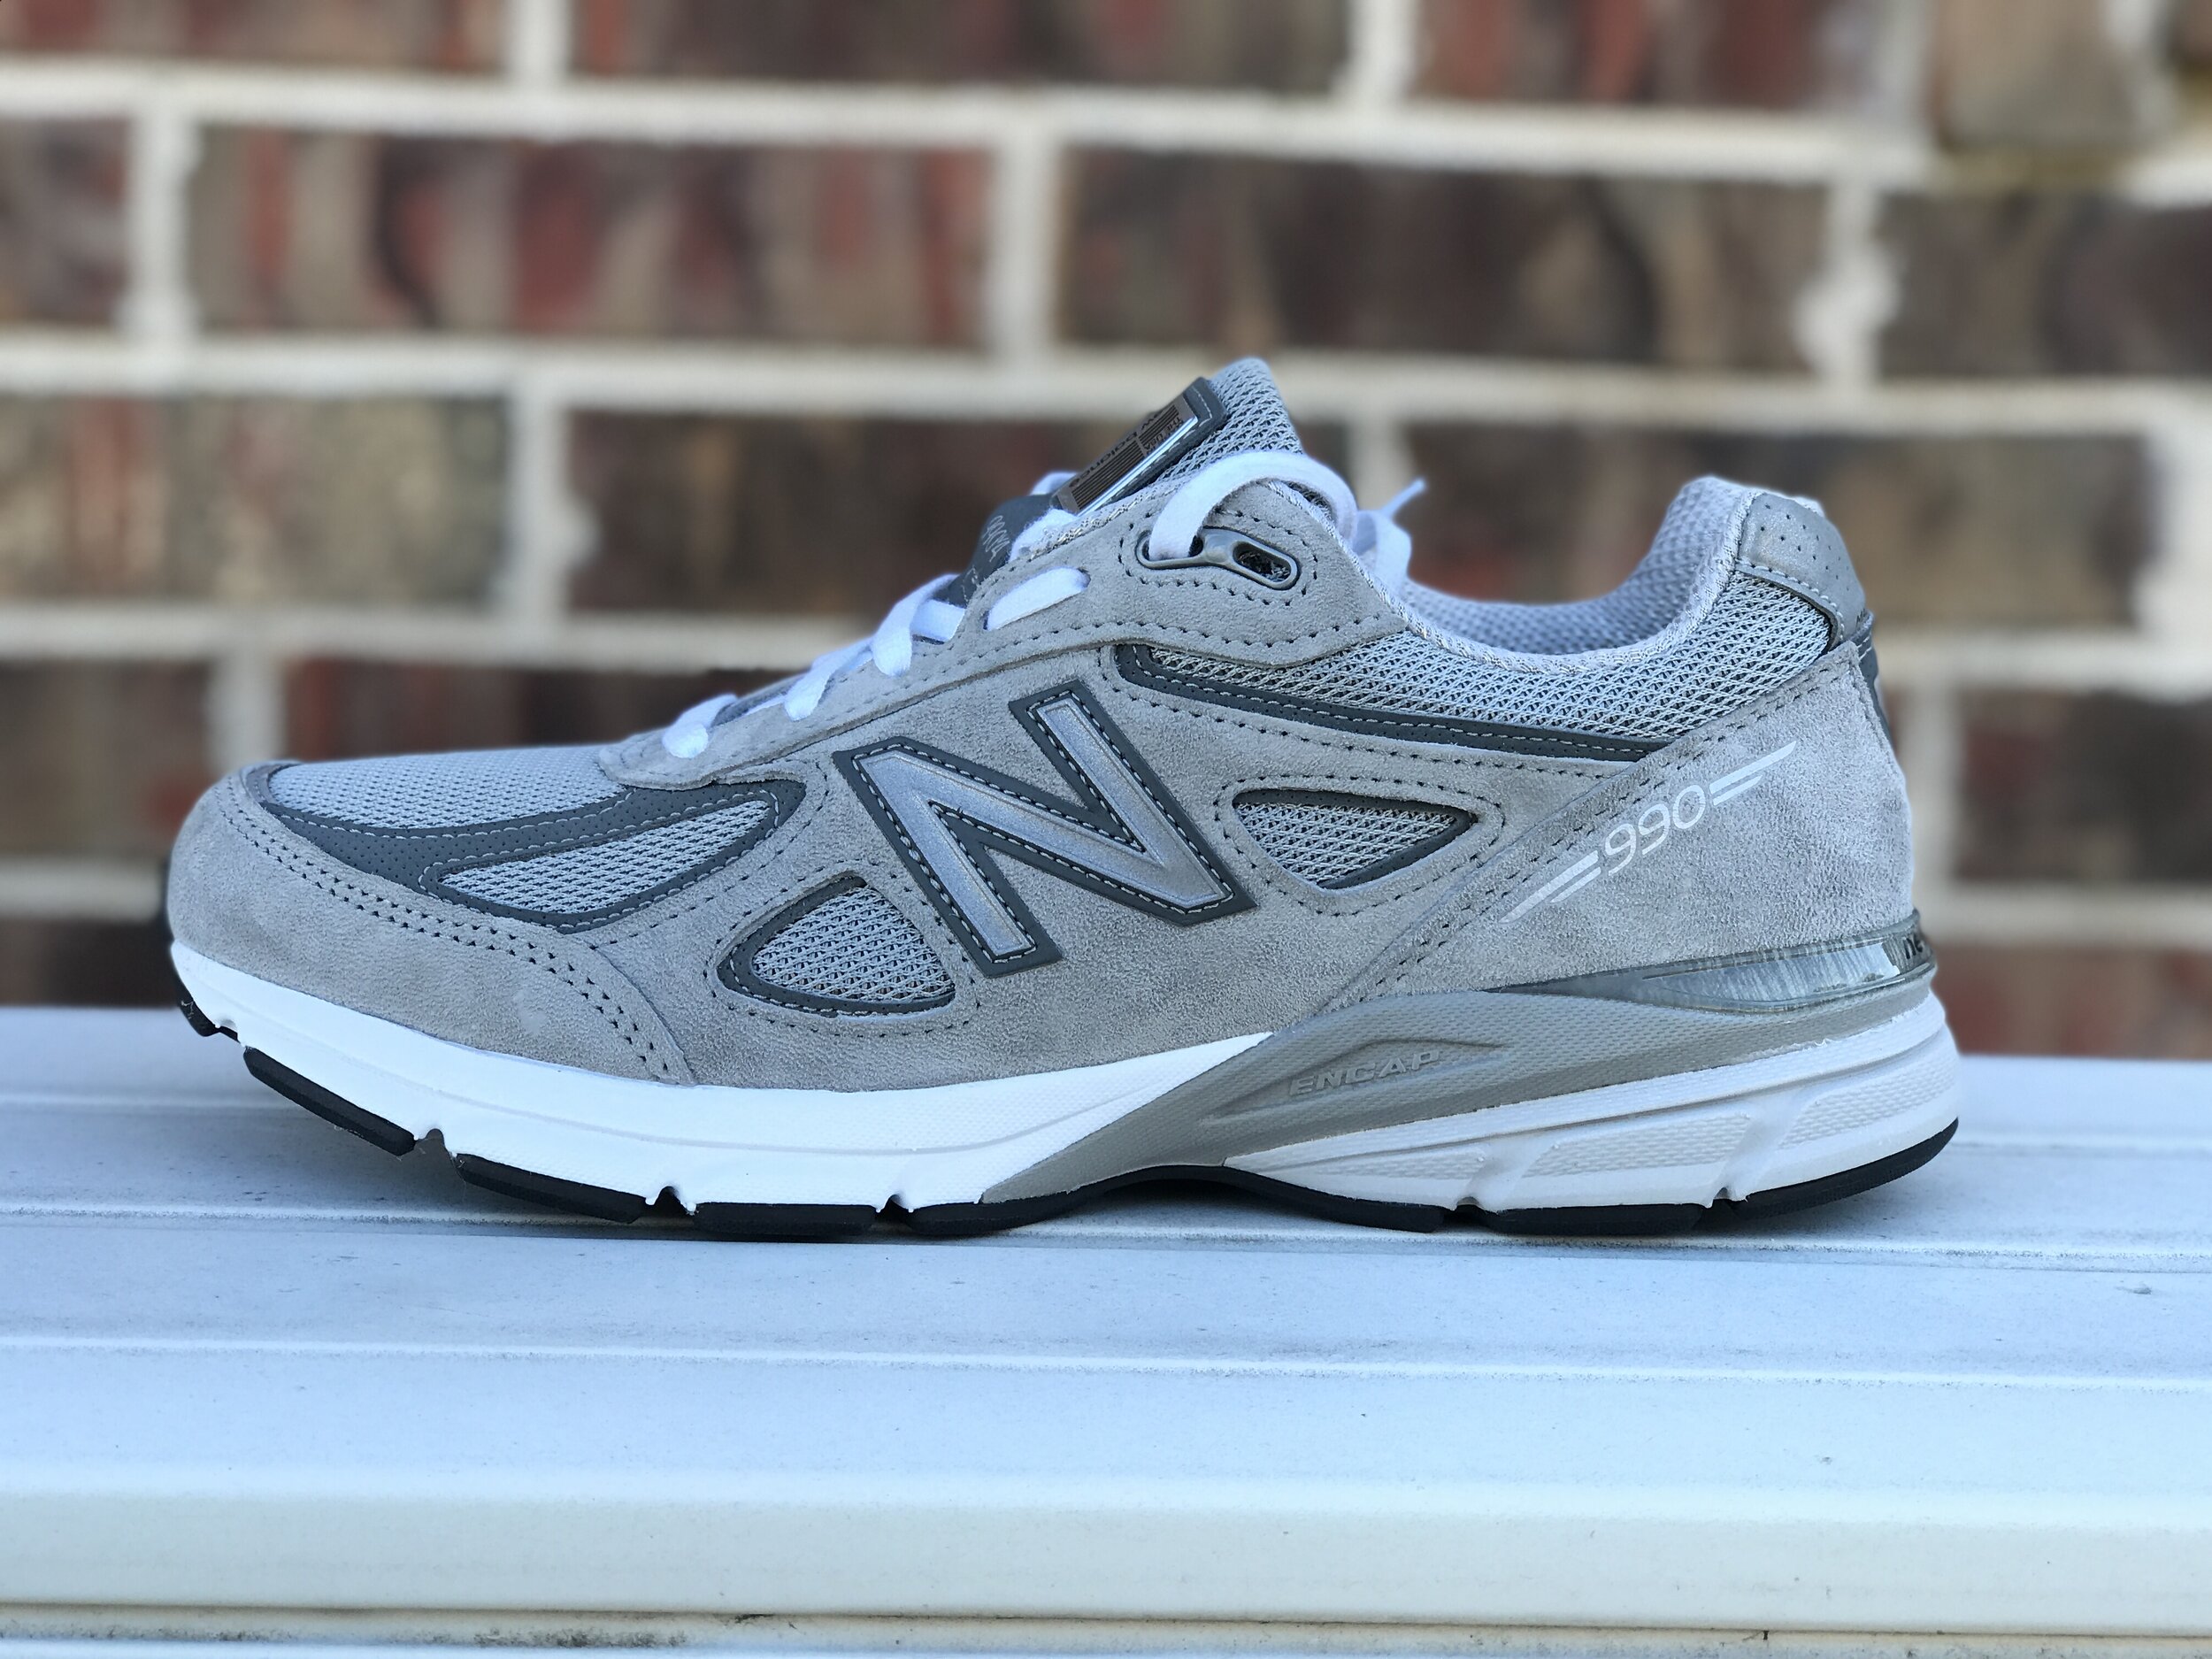 How Does The New Balance 990v4 Fit 